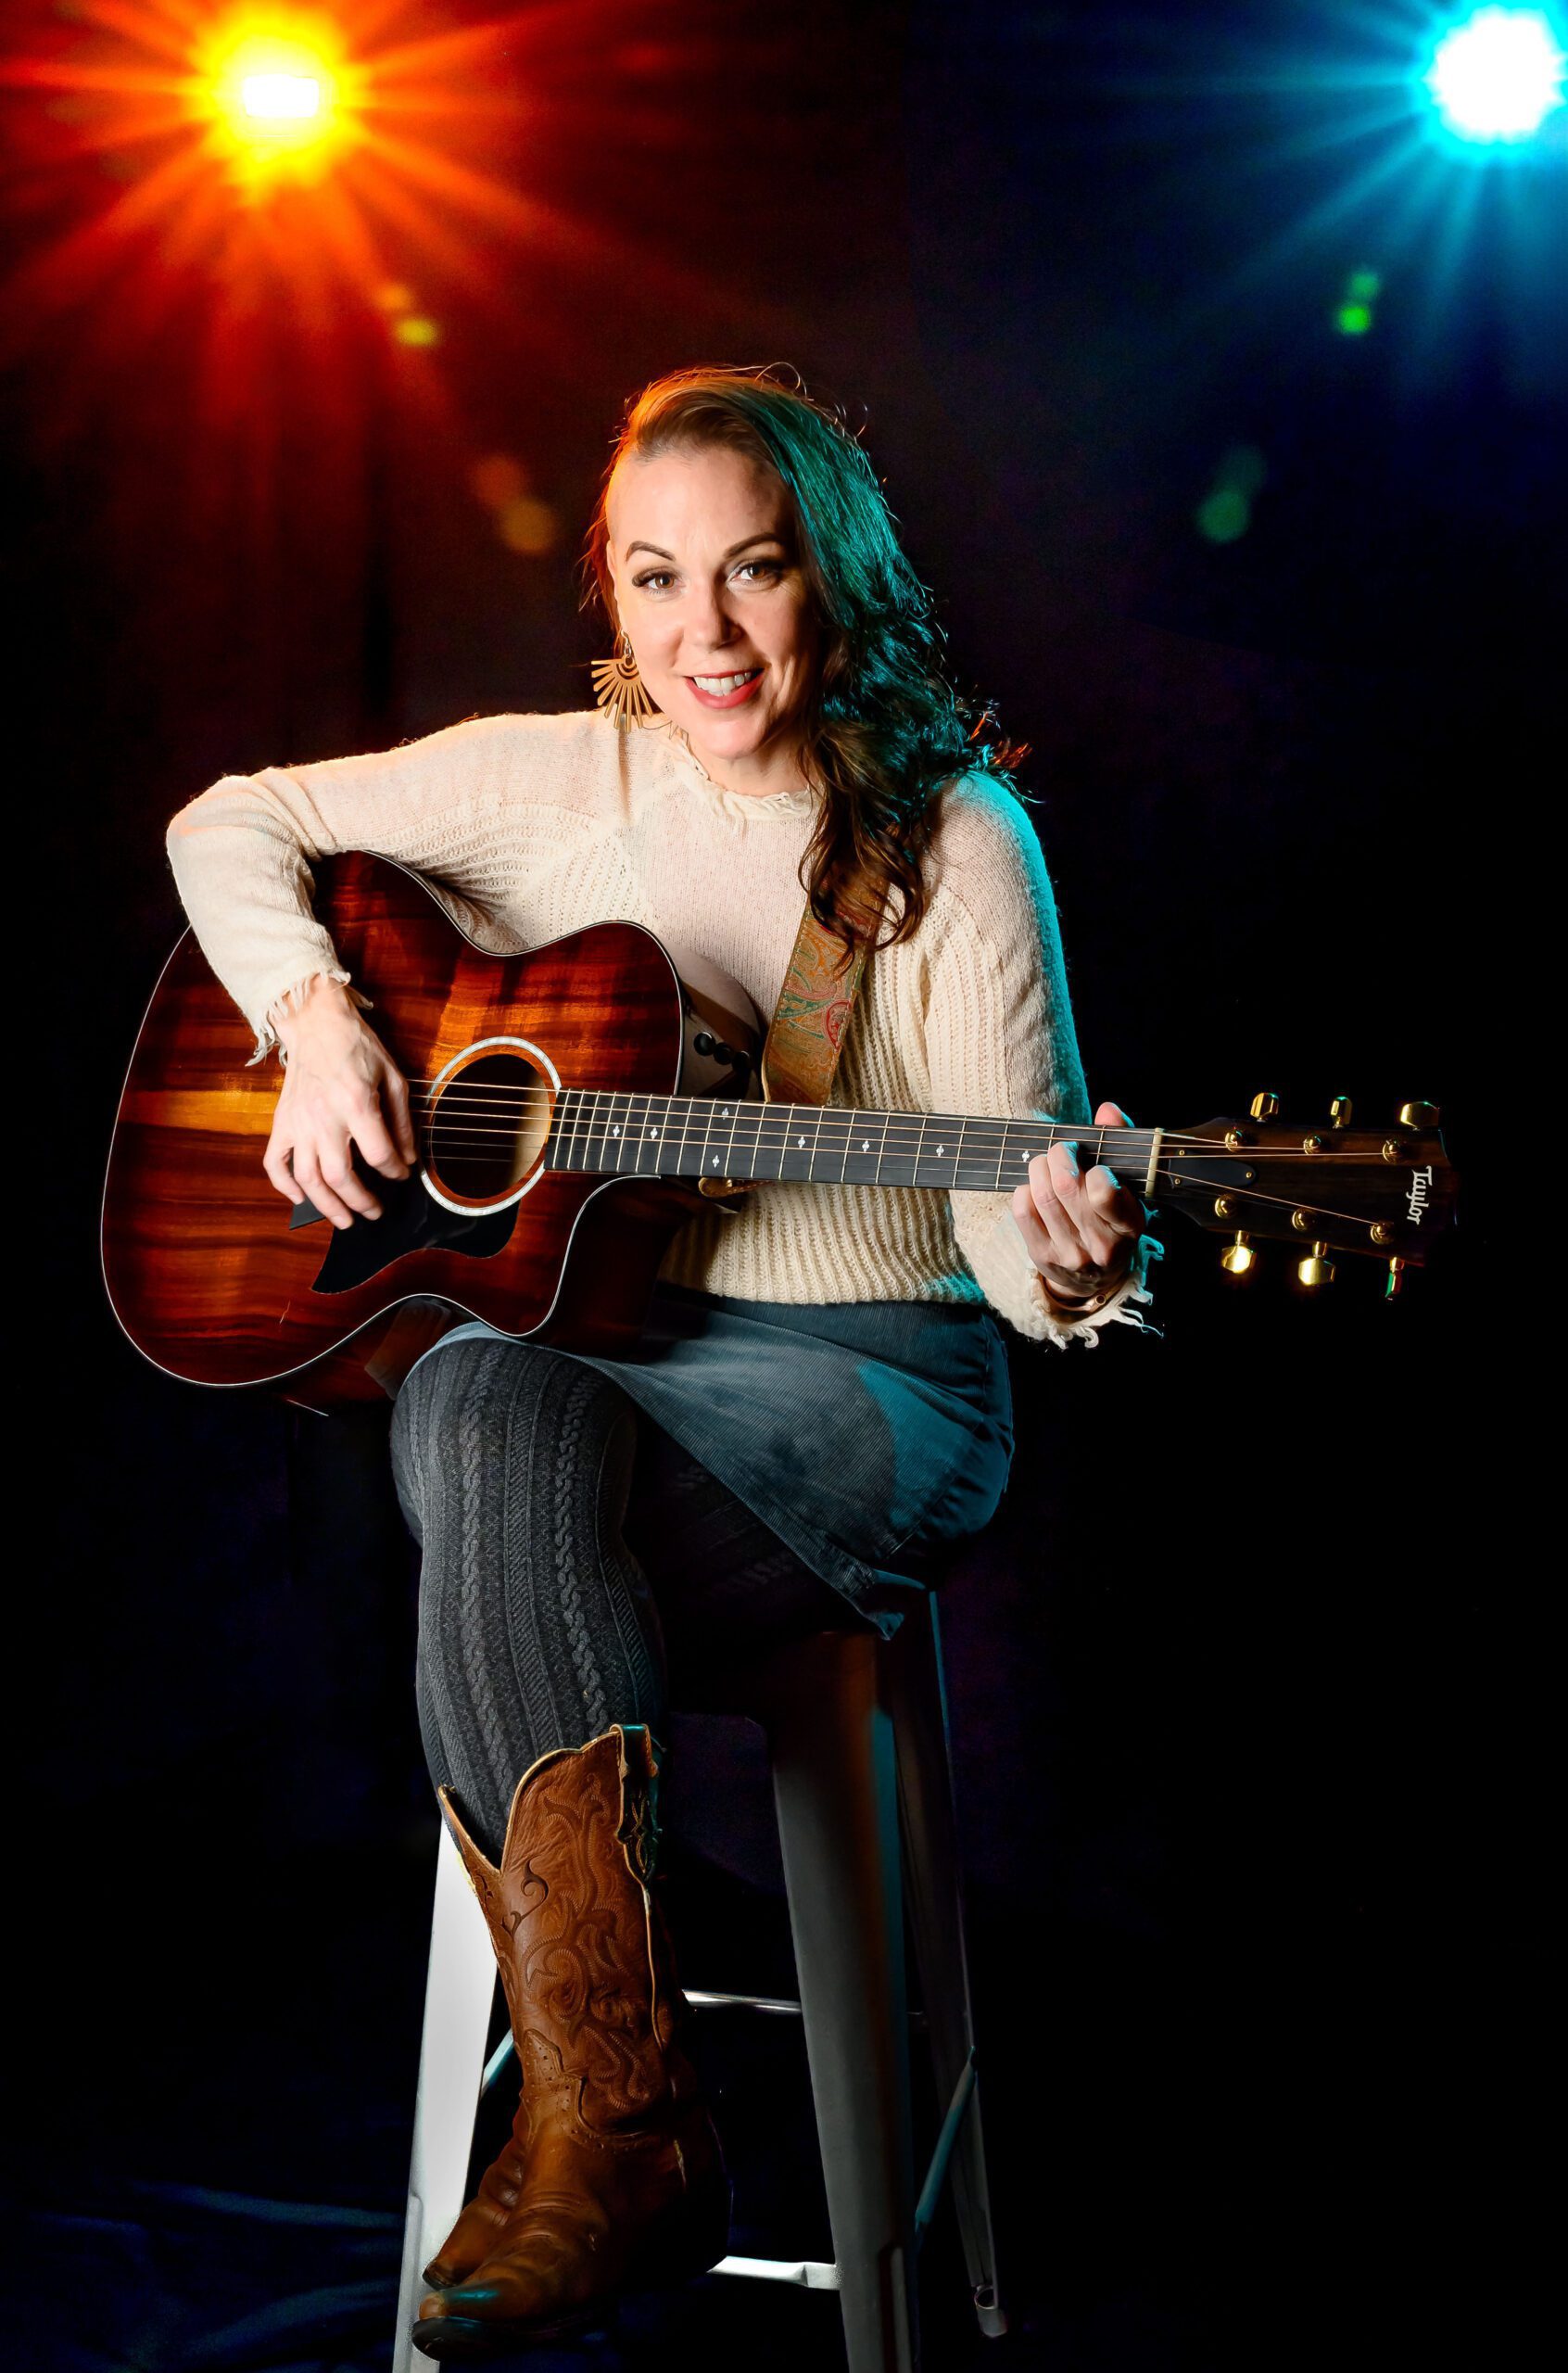 Woman sitting on a stool holding a guitar with colorful lights behind her